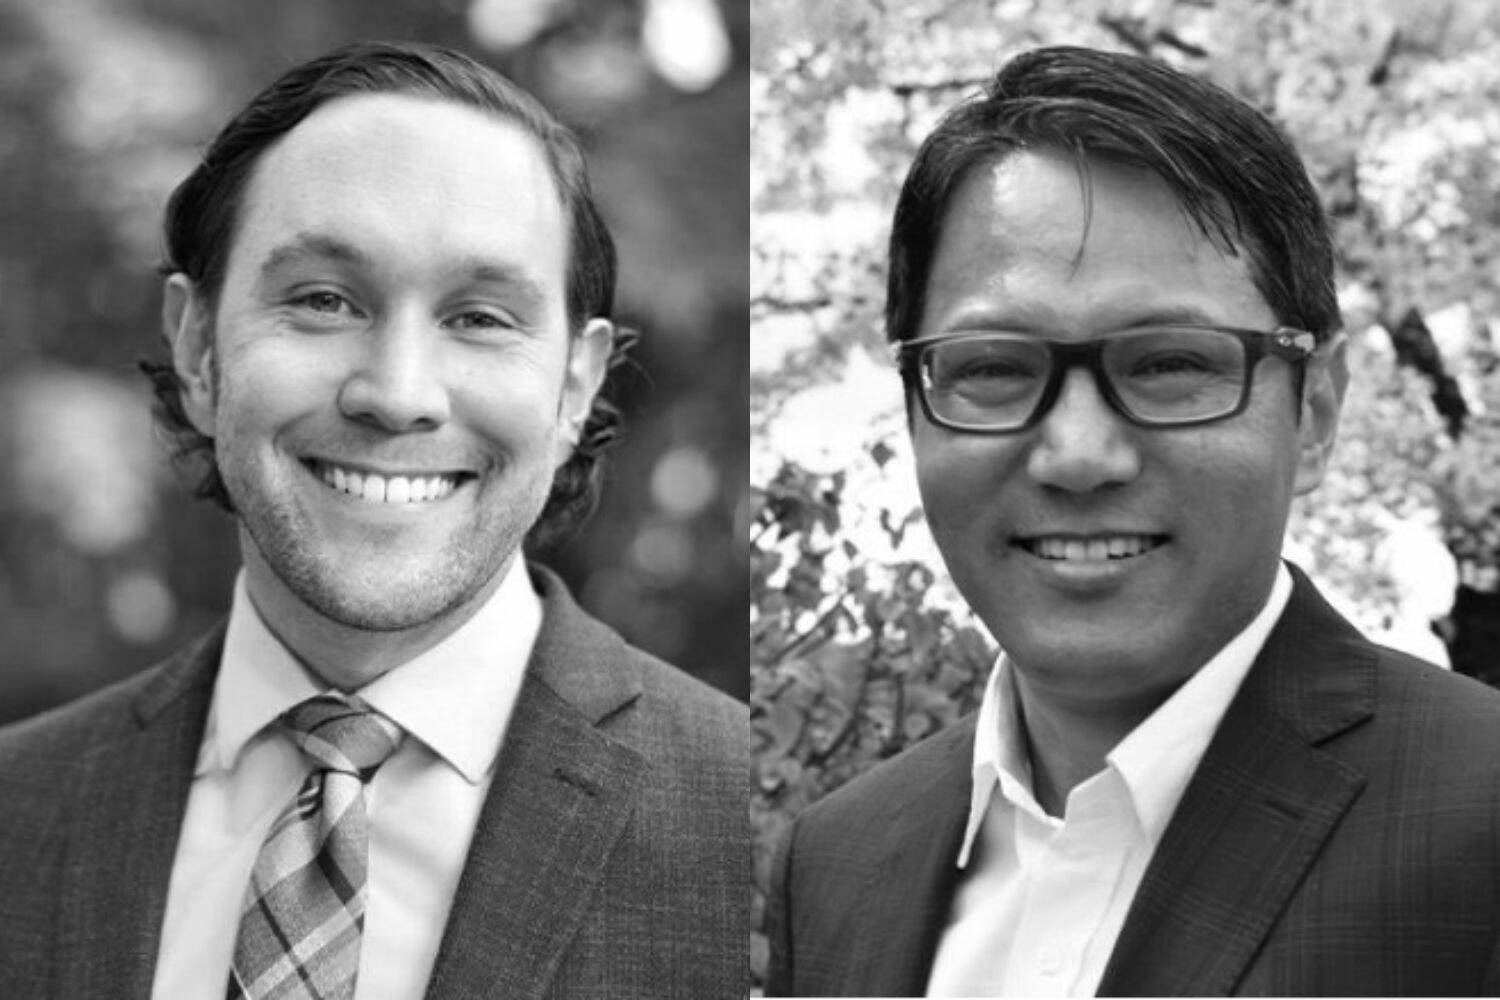 Ryan McIrvin (left) and Sanjeev Yonzon (right). (Screenshot from King County Elections website)